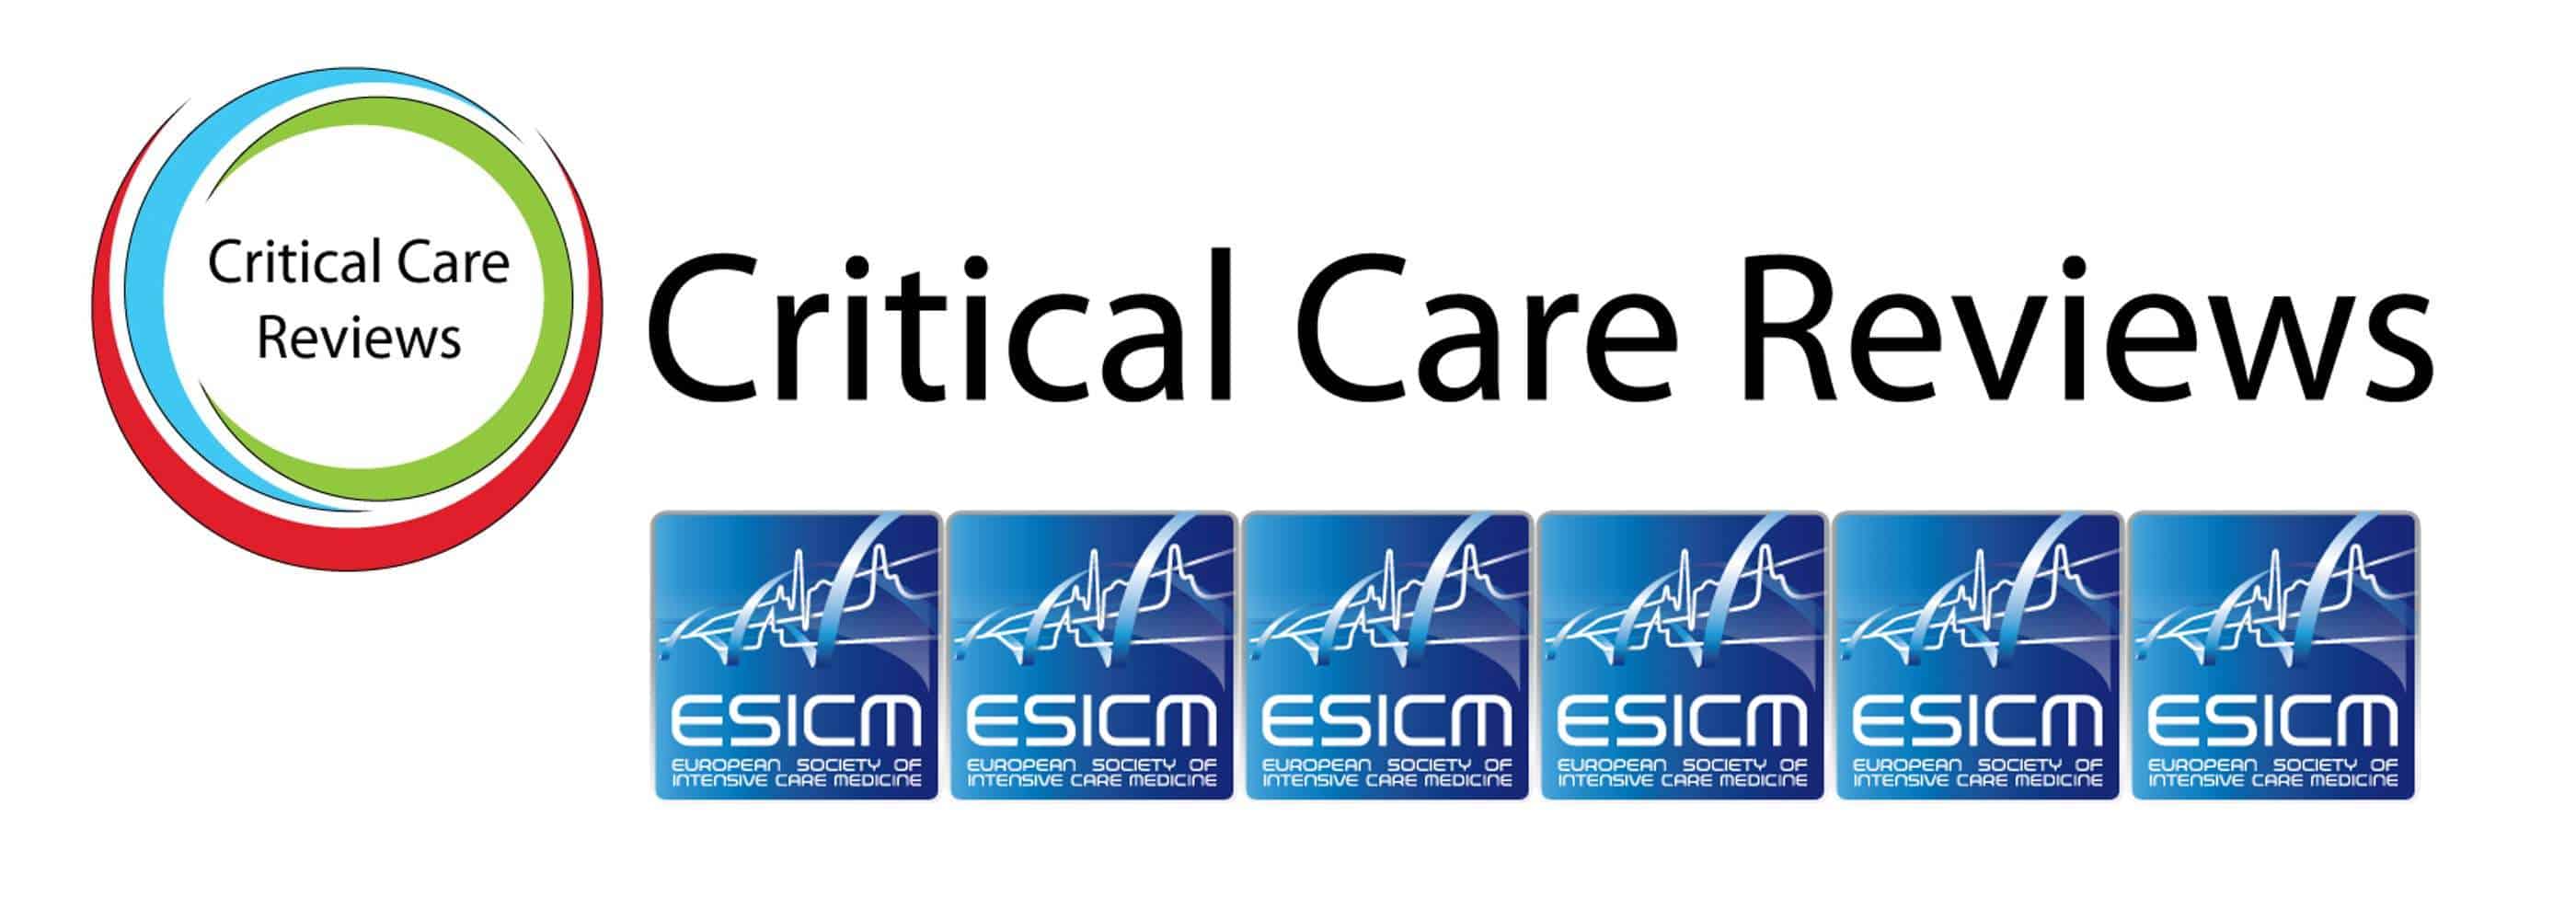 ESICM Logo - ESICM Update on Crit Care Reviews Care Network